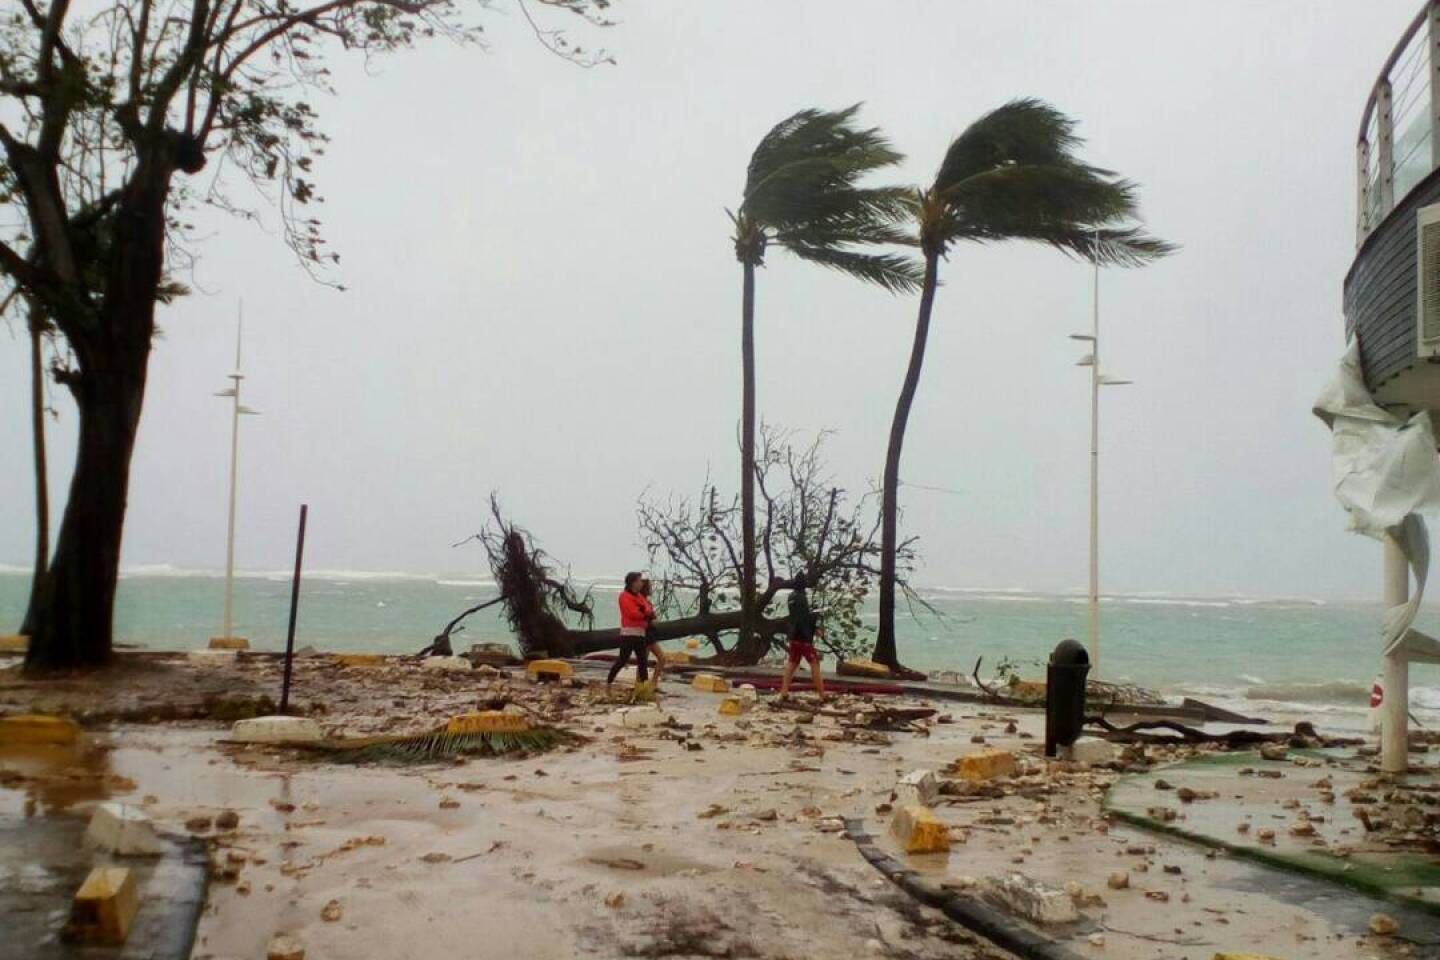 People walk by a fallen tree off the shore of Sainte-Anne on the French Caribbean island of Guadeloupe after the passing of Hurricane Maria.